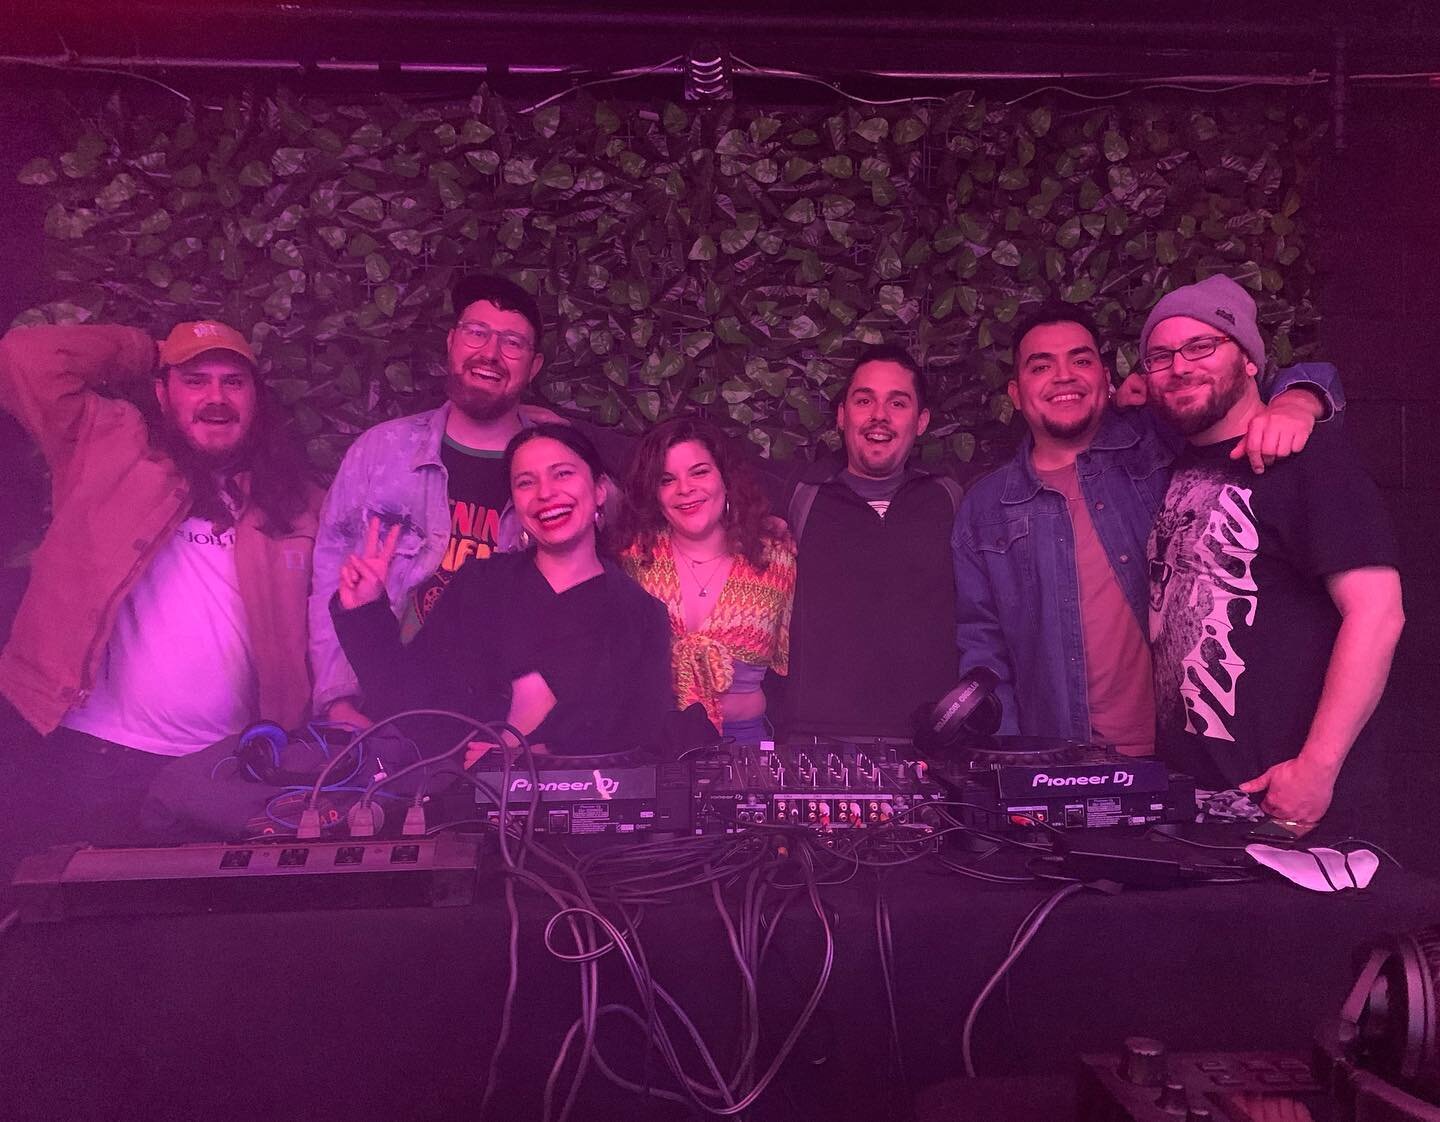 love these people so much! Thank you for your energy last night. I was too busy bussin it down to document 😂

BIG love to @elsonidoradio @lizzexists @timbreroom and everyone on the dance floor for creating such a special night and loving space 
💕💕